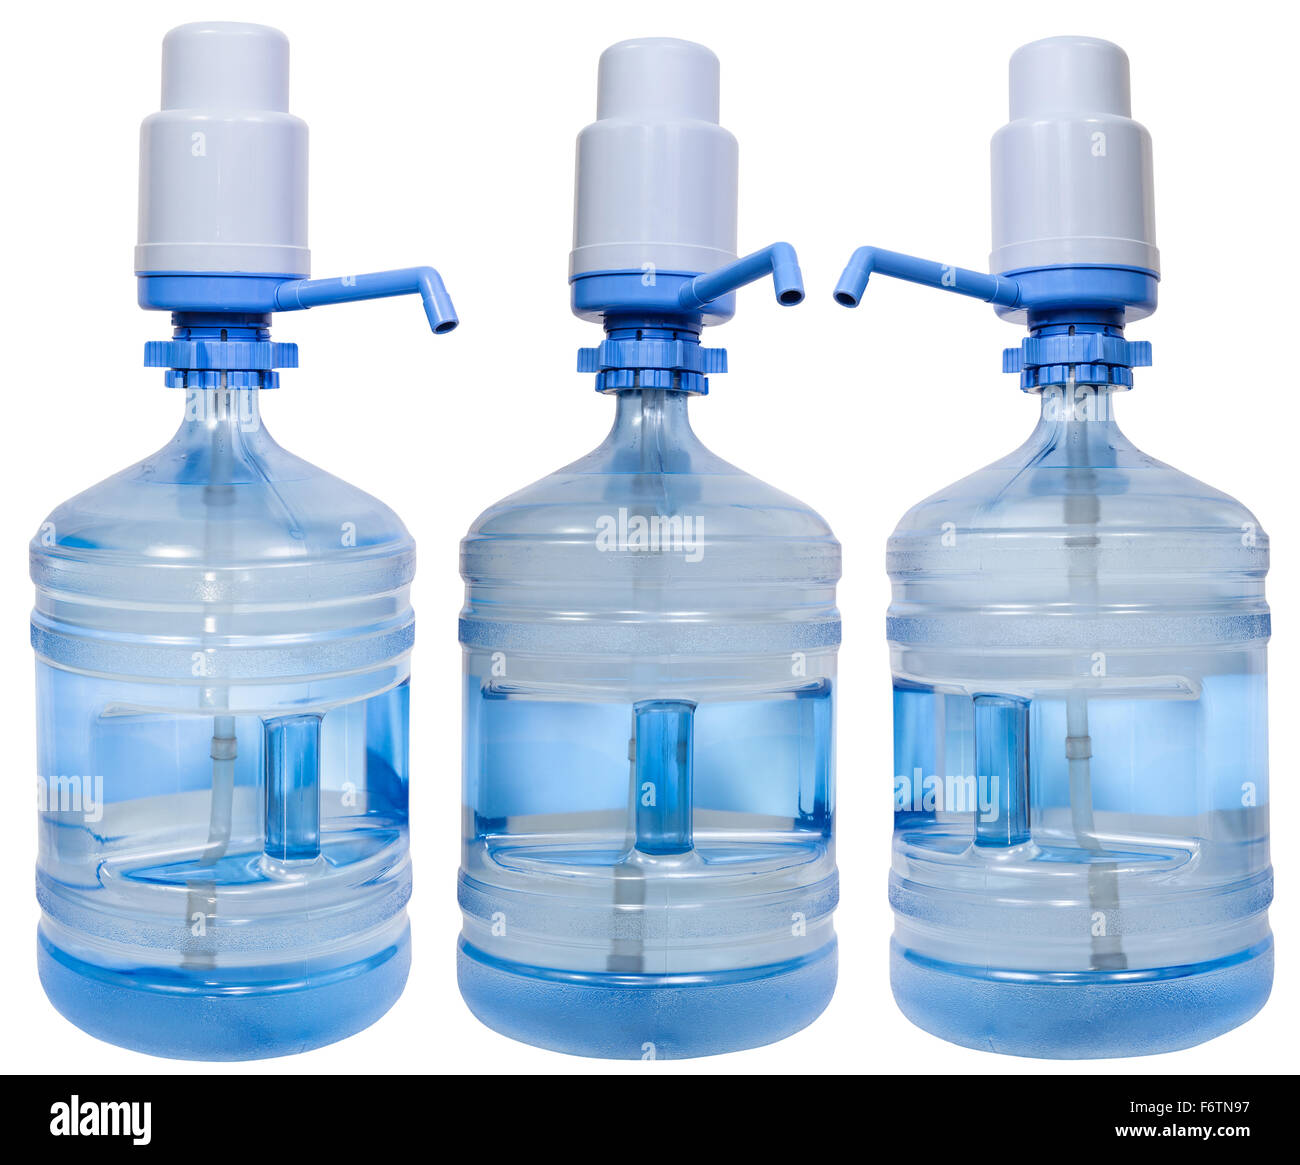 https://c8.alamy.com/comp/F6TN97/set-of-drinking-water-bottles-with-manual-pump-dispensers-isolated-F6TN97.jpg